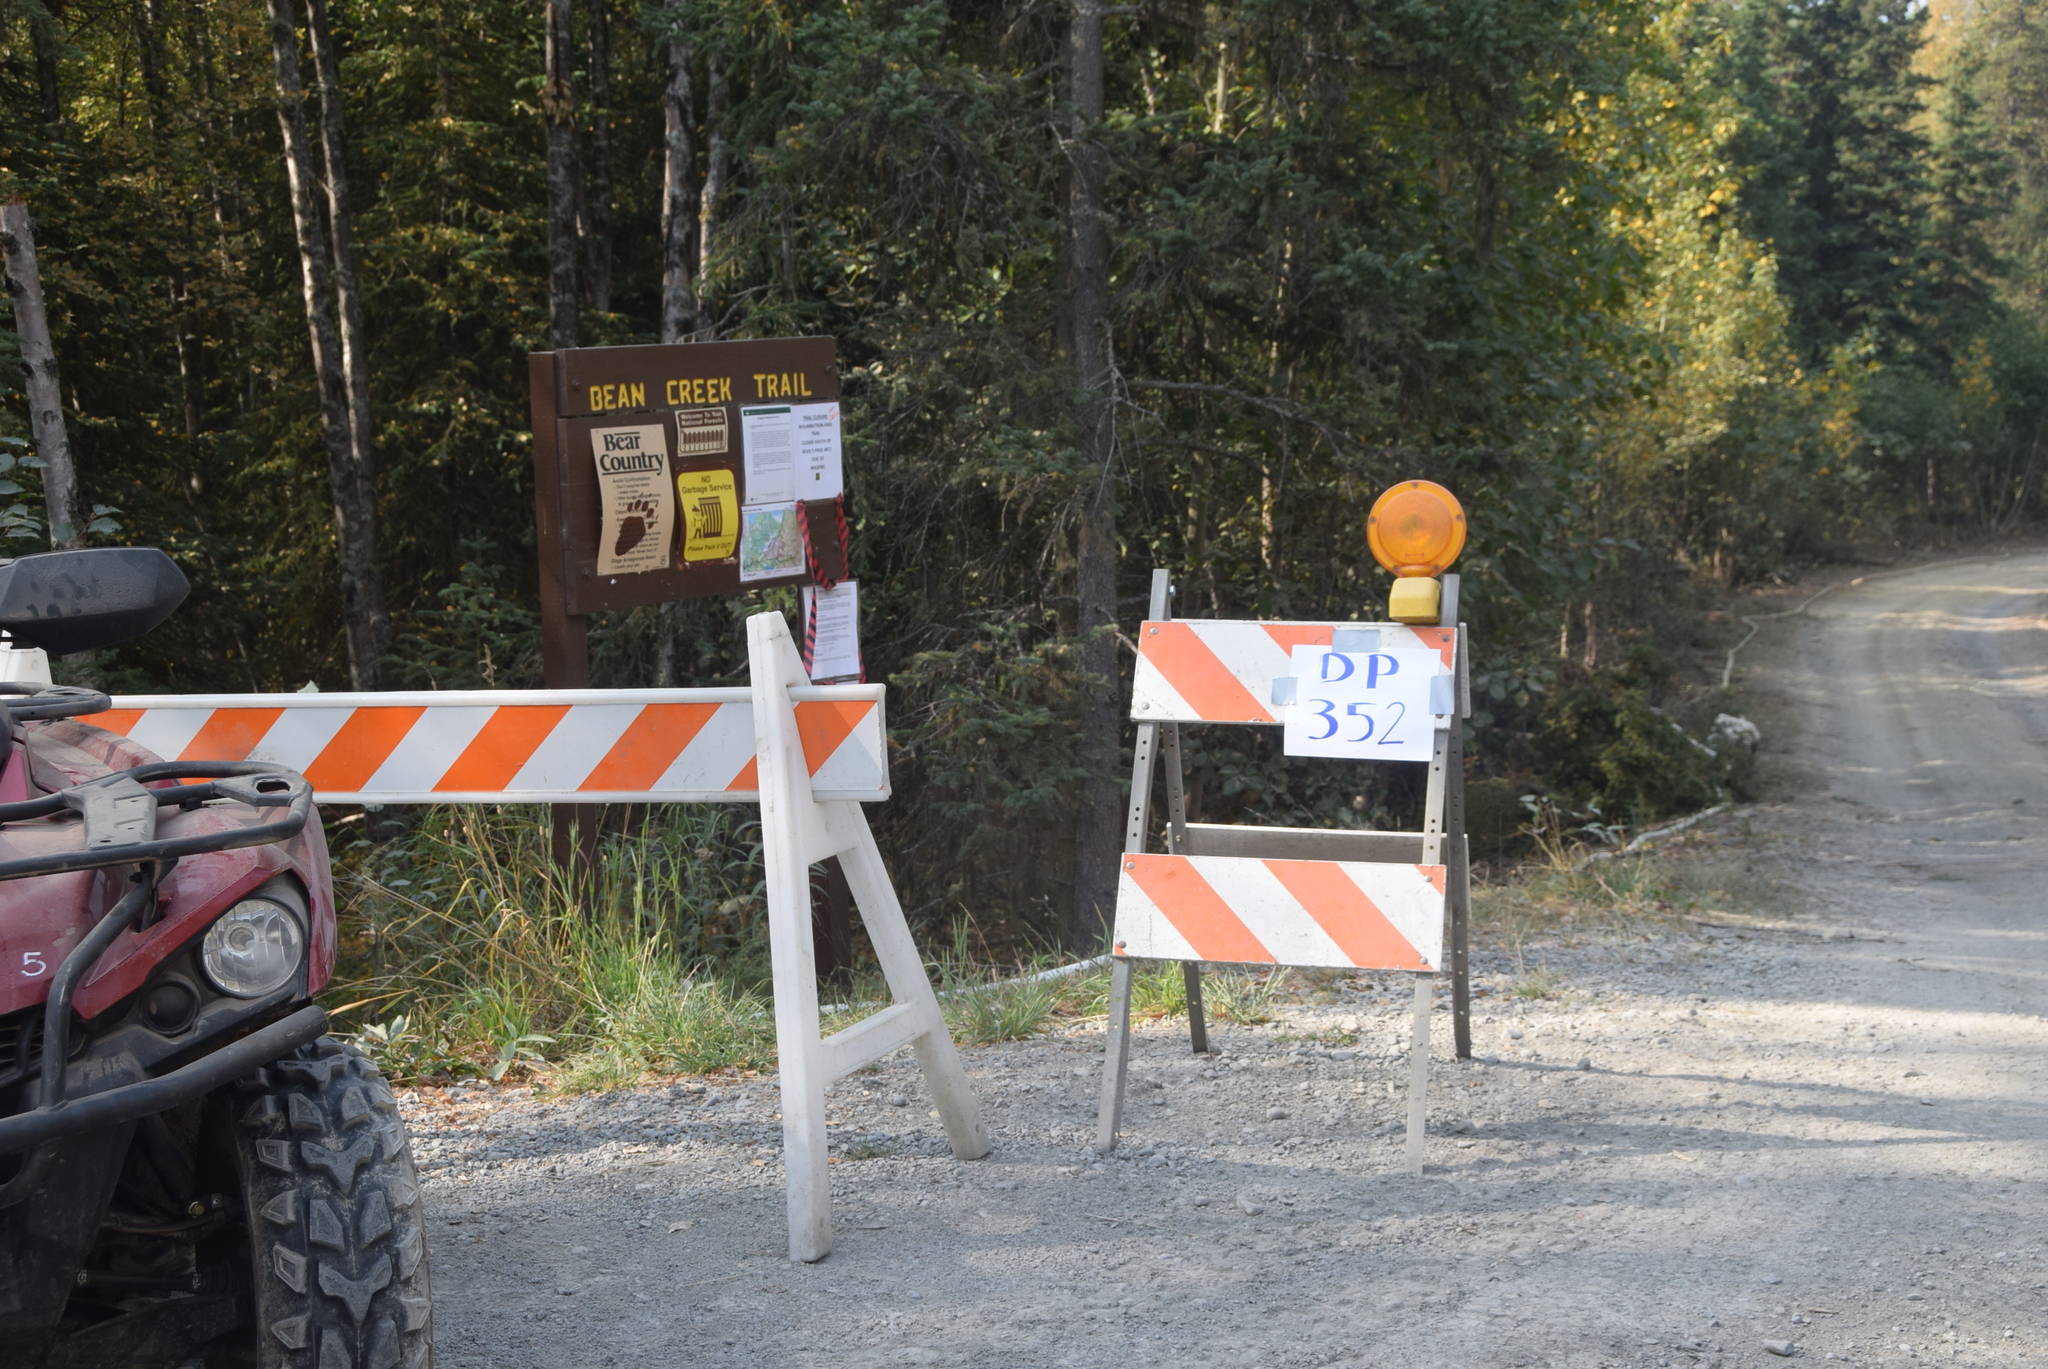 A sign for one of the drop points in Cooper Landing, Alaska can be seen here at the entrance to the Bean Creek Trail on Aug. 30, 2019. Drop points act as meeting points for firefighters working in remote locations and are where supplies such as fuel and spare parts are kept for easy access. (Photo by Brian Mazurek/Peninsula Clarion)